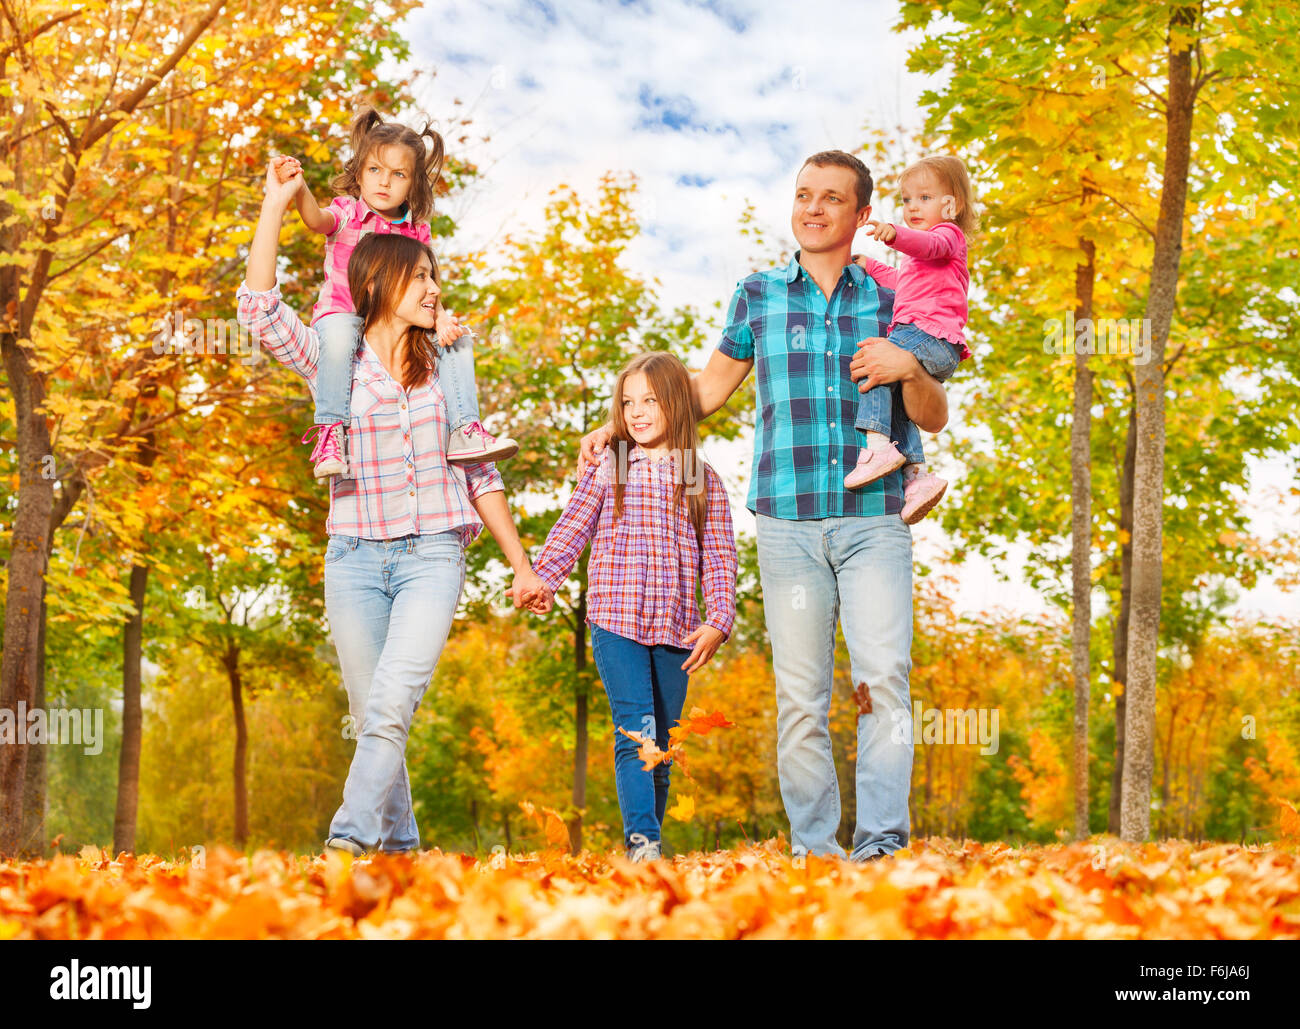 Family walk in the autumn park holding hands Stock Photo